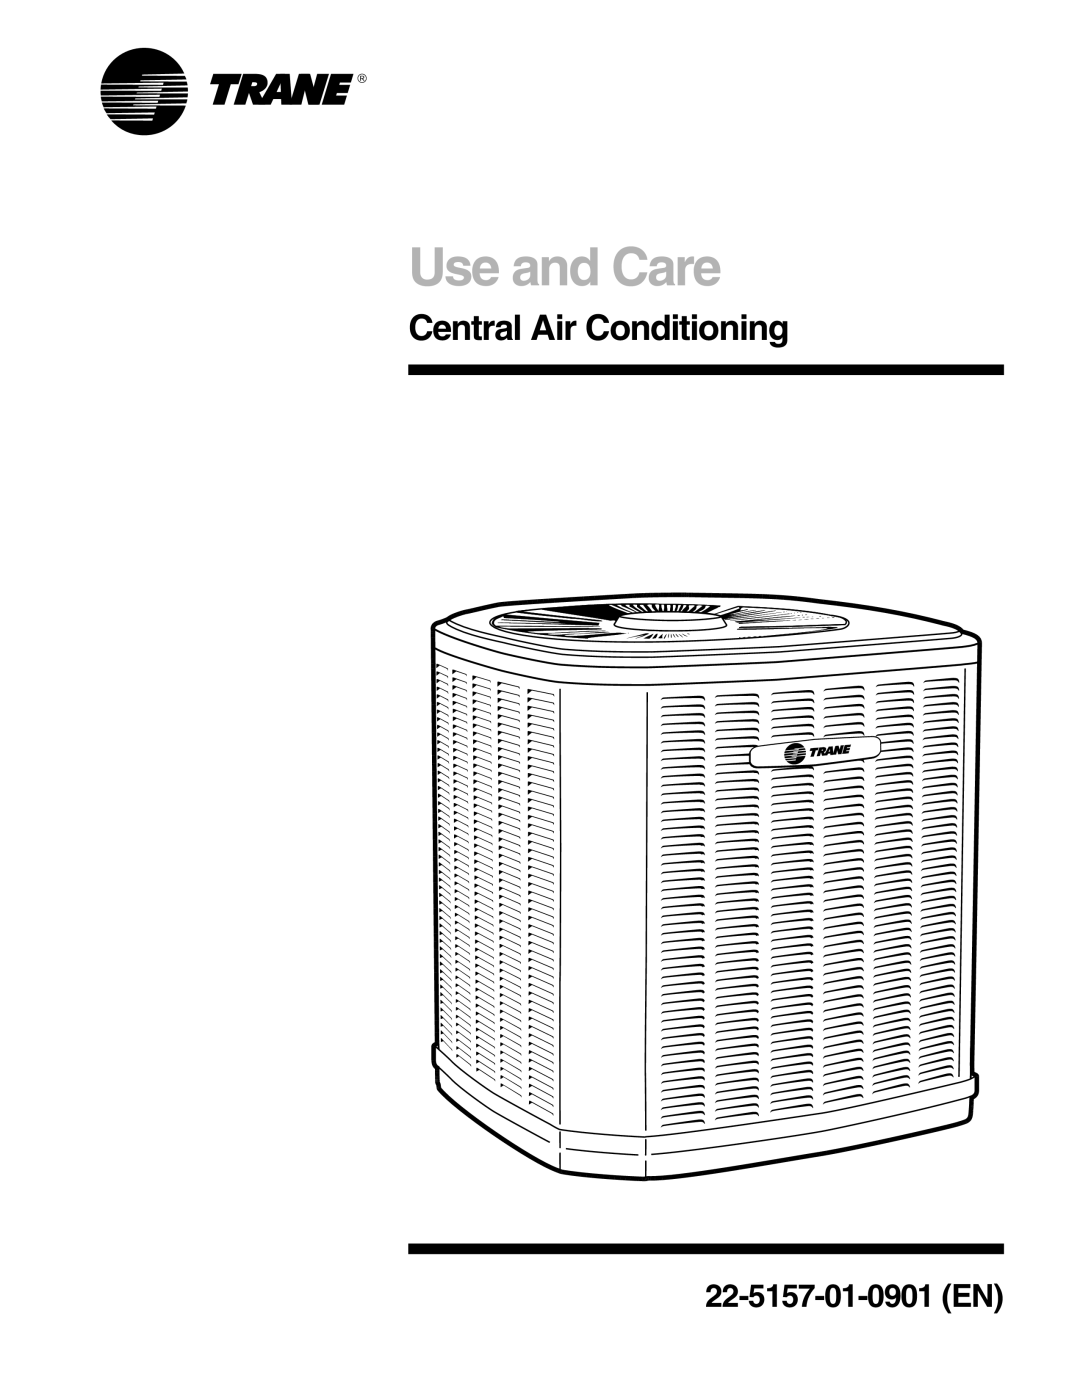 Trane Central Air Conditioning manual Use and Care, 22-5157-01-0901EN 